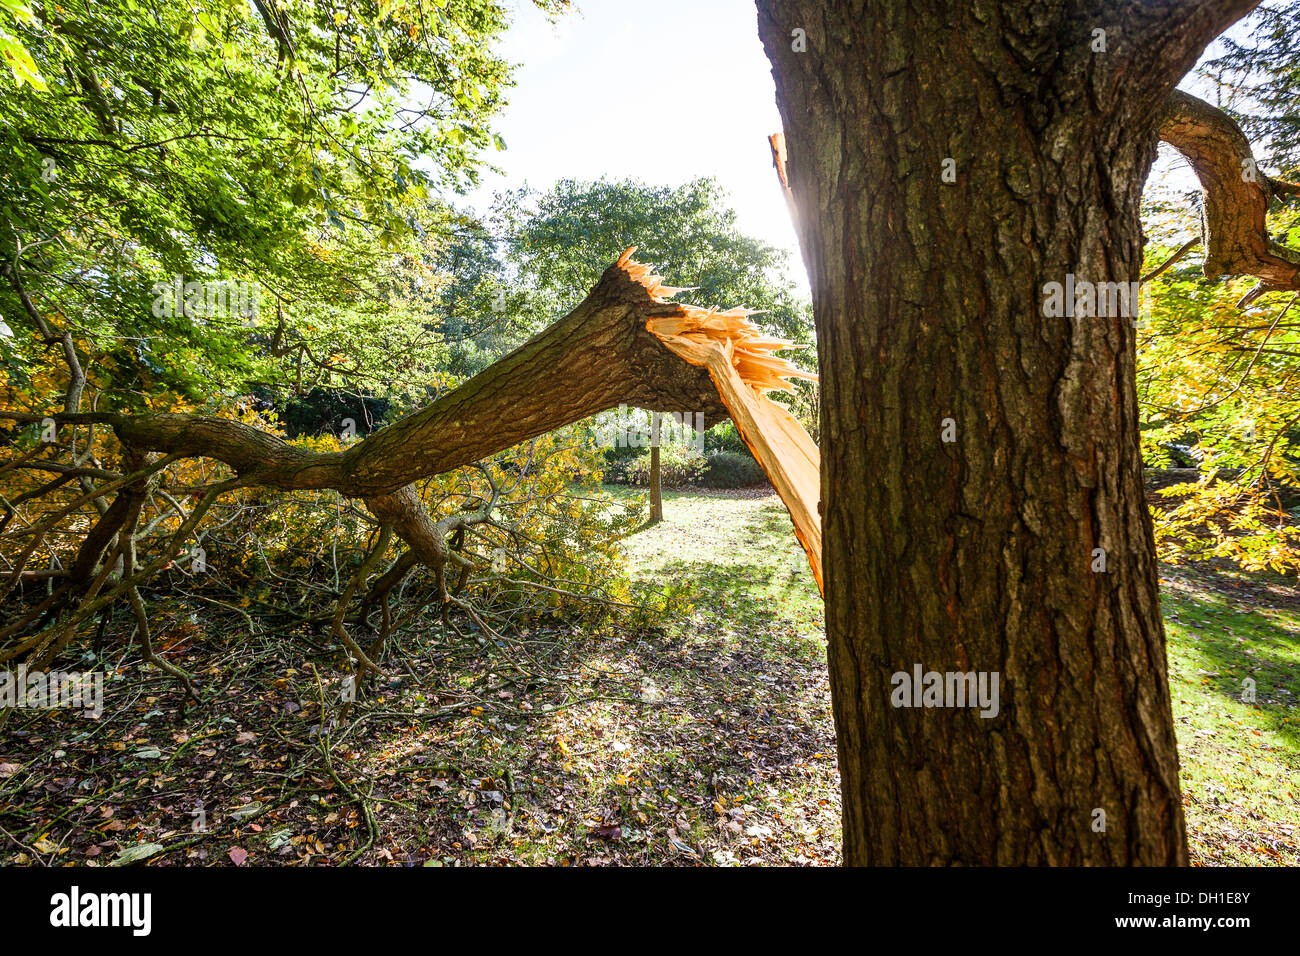 BATH, UK - OCTOBER 29: Large tree limb broken off during the 'St Jude' storm that travelled across Europe in late October 2013. Stock Photo